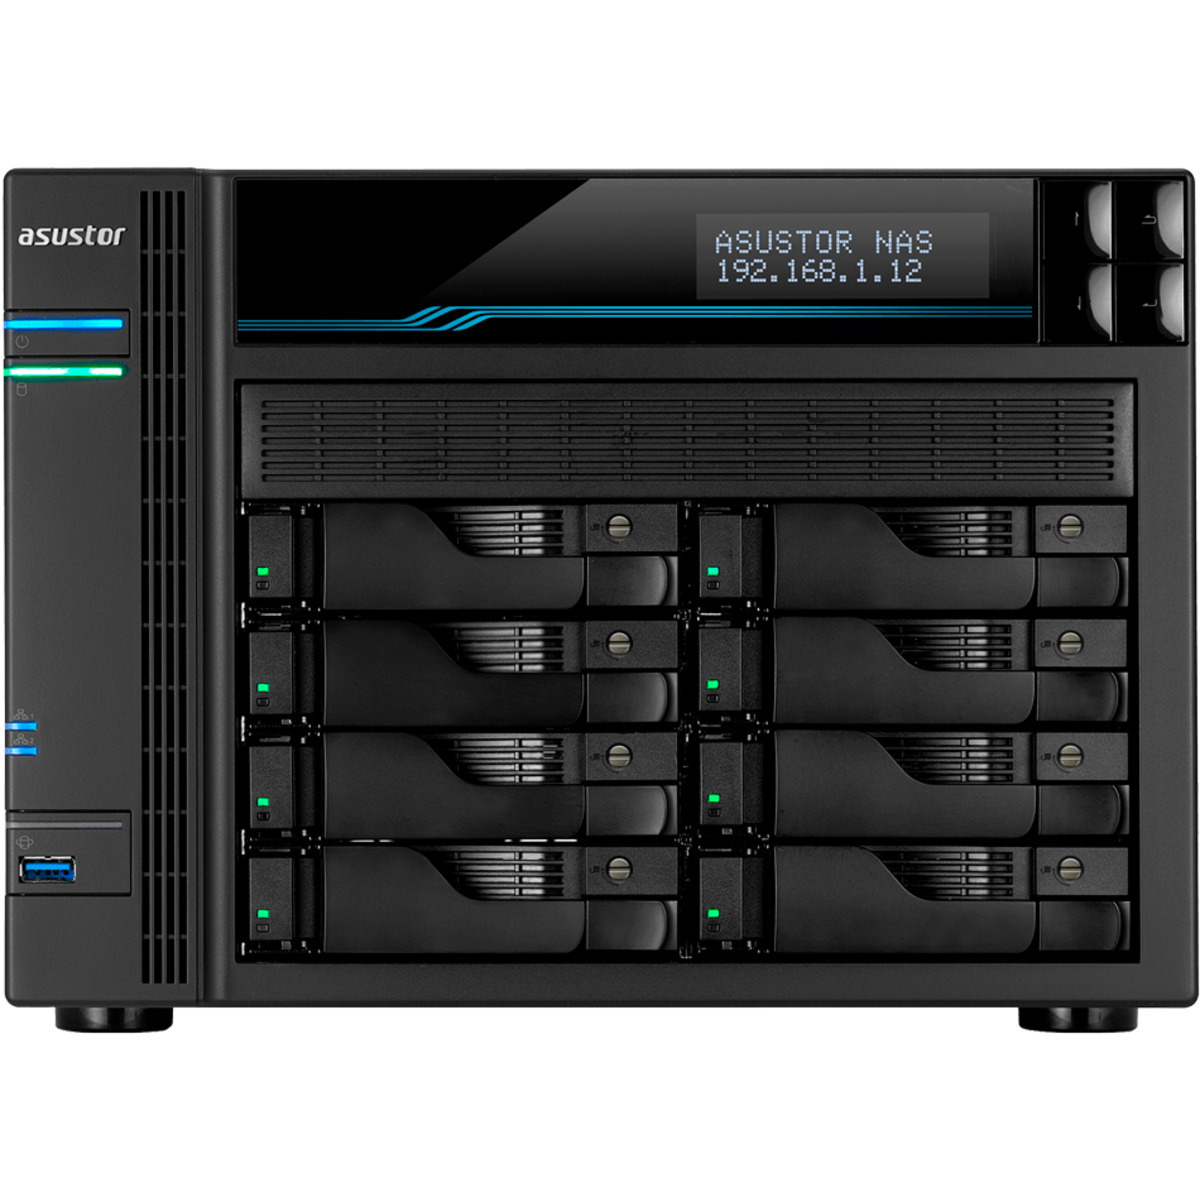 ASUSTOR AS6508T Lockerstor 8 80tb 8-Bay Desktop Multimedia / Power User / Business NAS - Network Attached Storage Device 4x20tb Toshiba Enterprise Capacity MG10ACA20TE 3.5 7200rpm SATA 6Gb/s HDD ENTERPRISE Class Drives Installed - Burn-In Tested - ON SALE - FREE RAM UPGRADE AS6508T Lockerstor 8